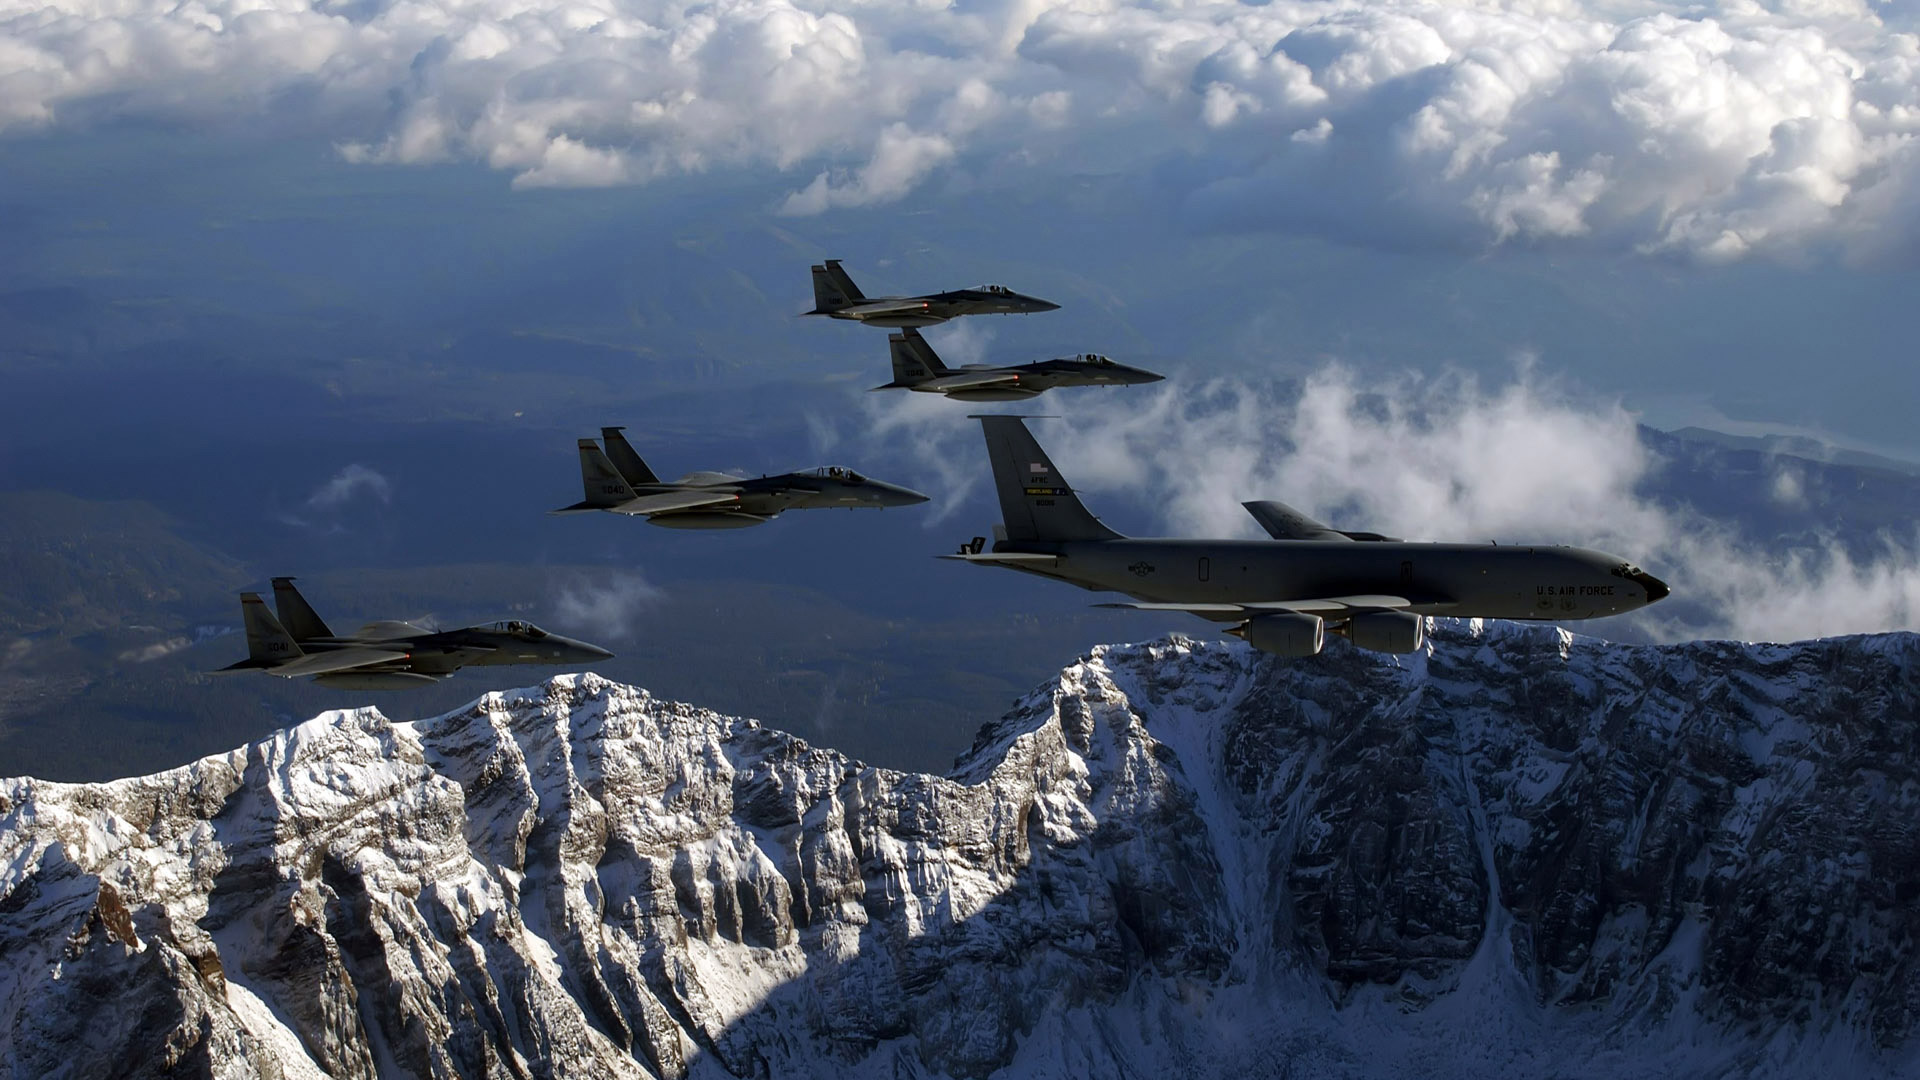 Us Air Force HD Wallpaper ImgHD Browse And